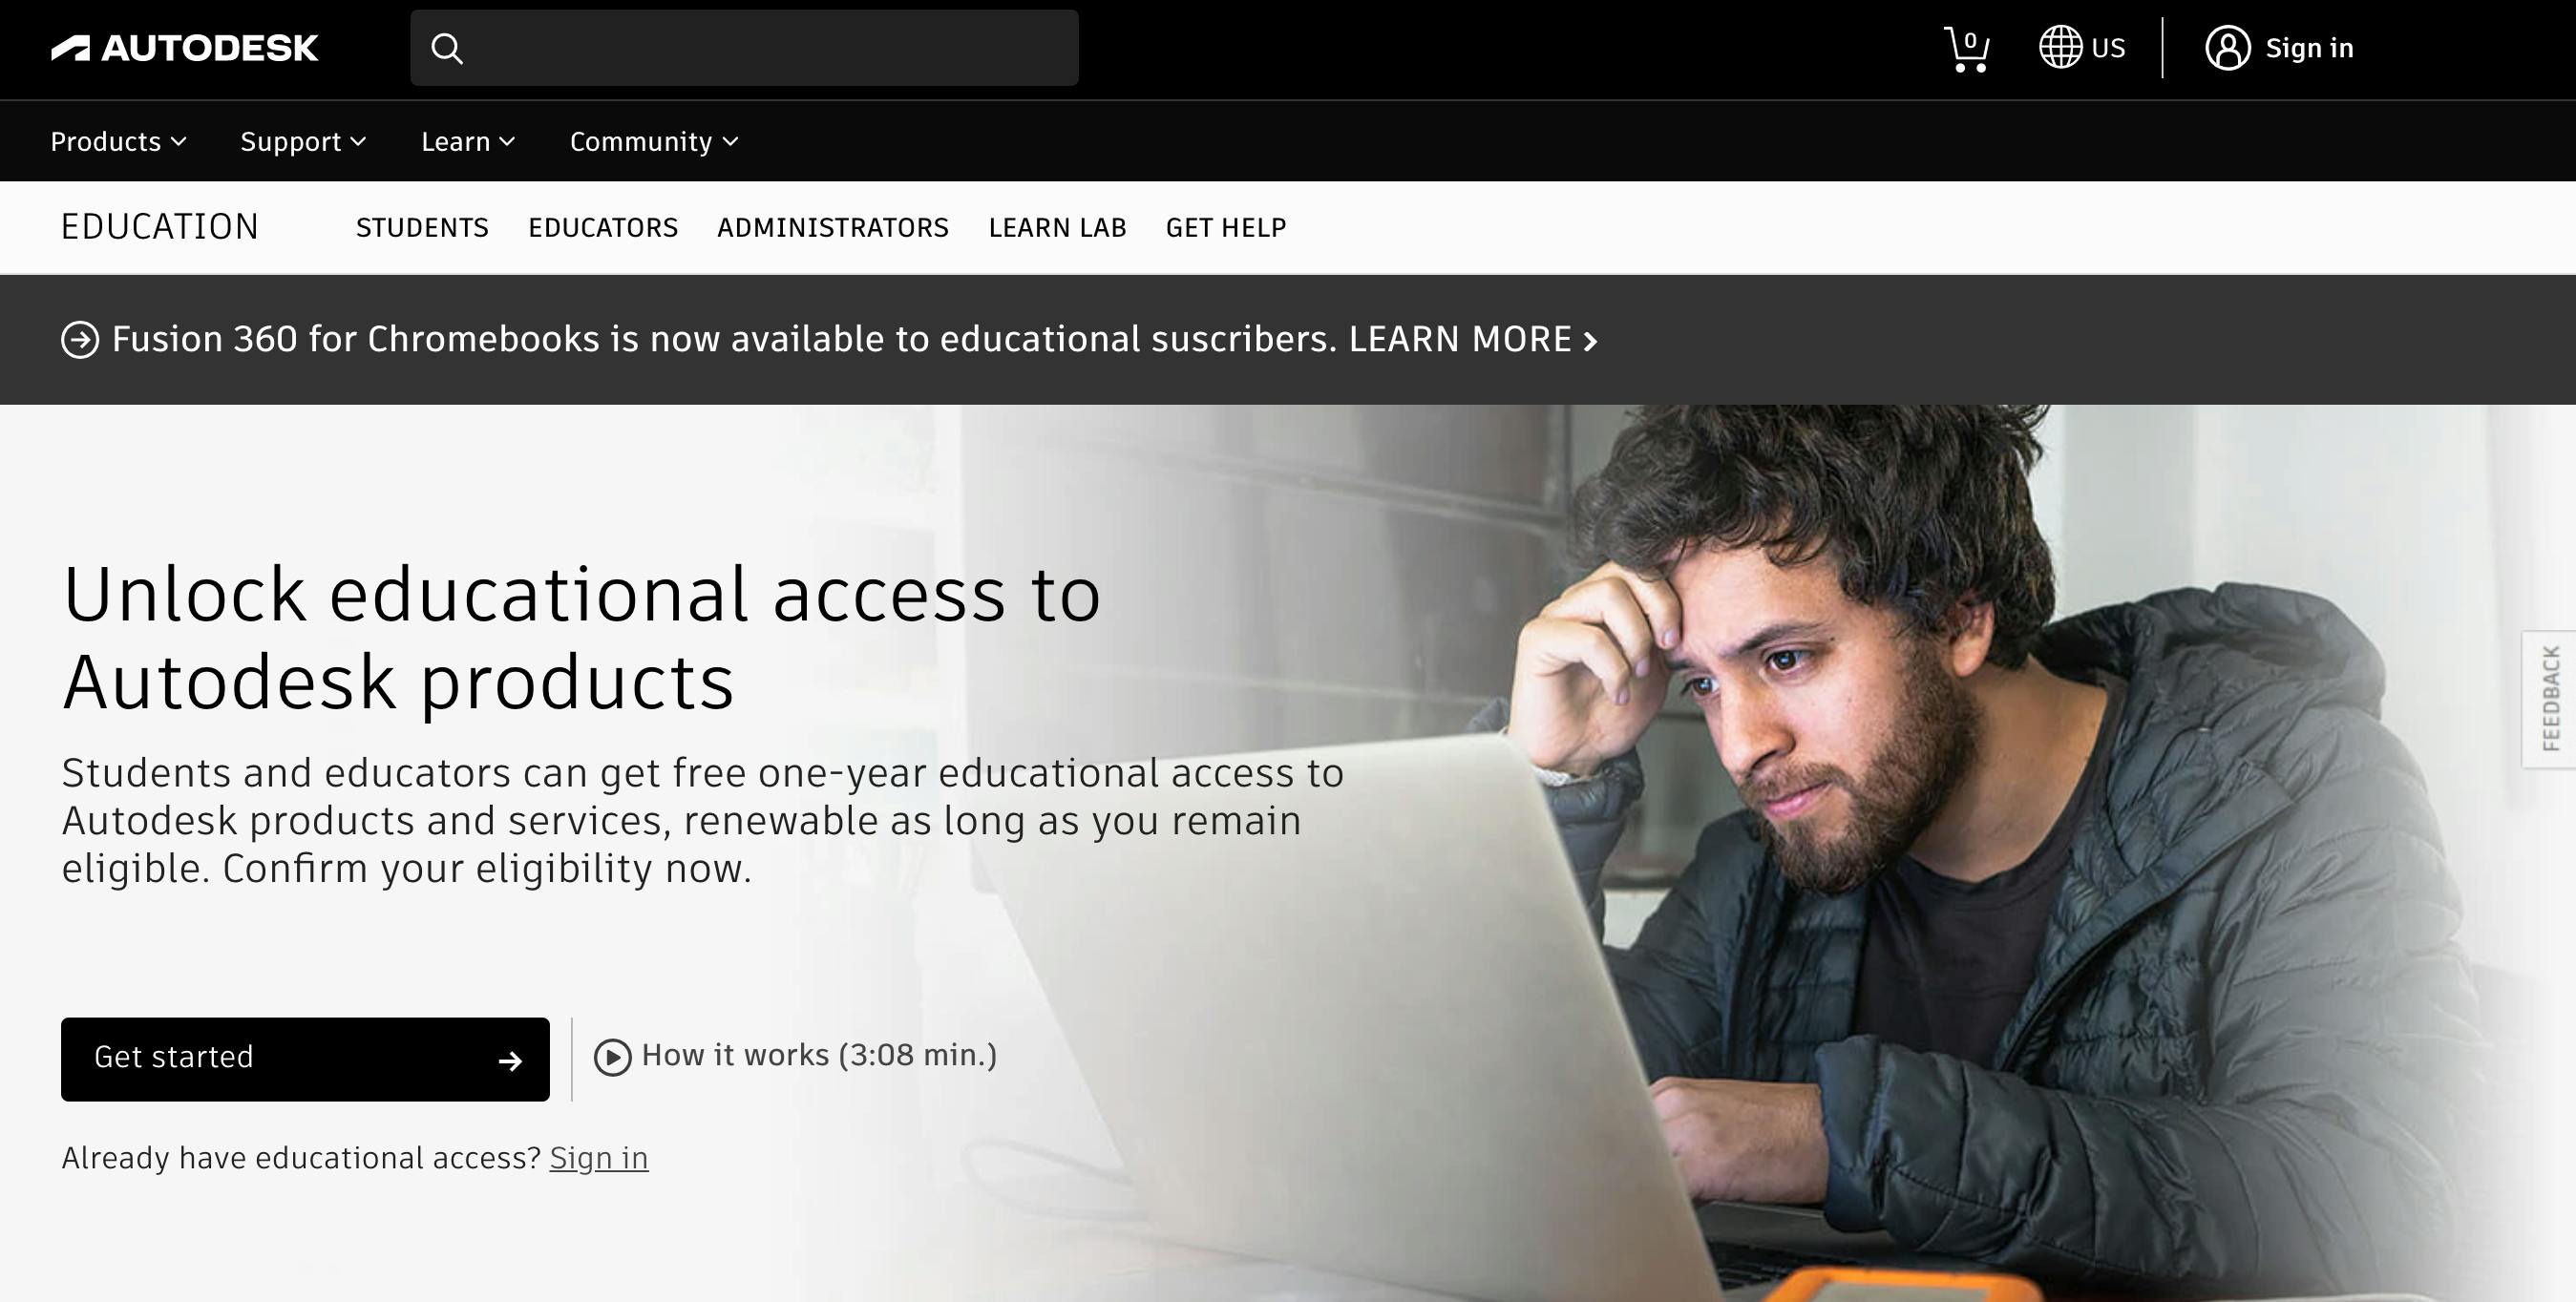 A screenshot from the Autodesk website advertising free one-year educational access for students and teachers.